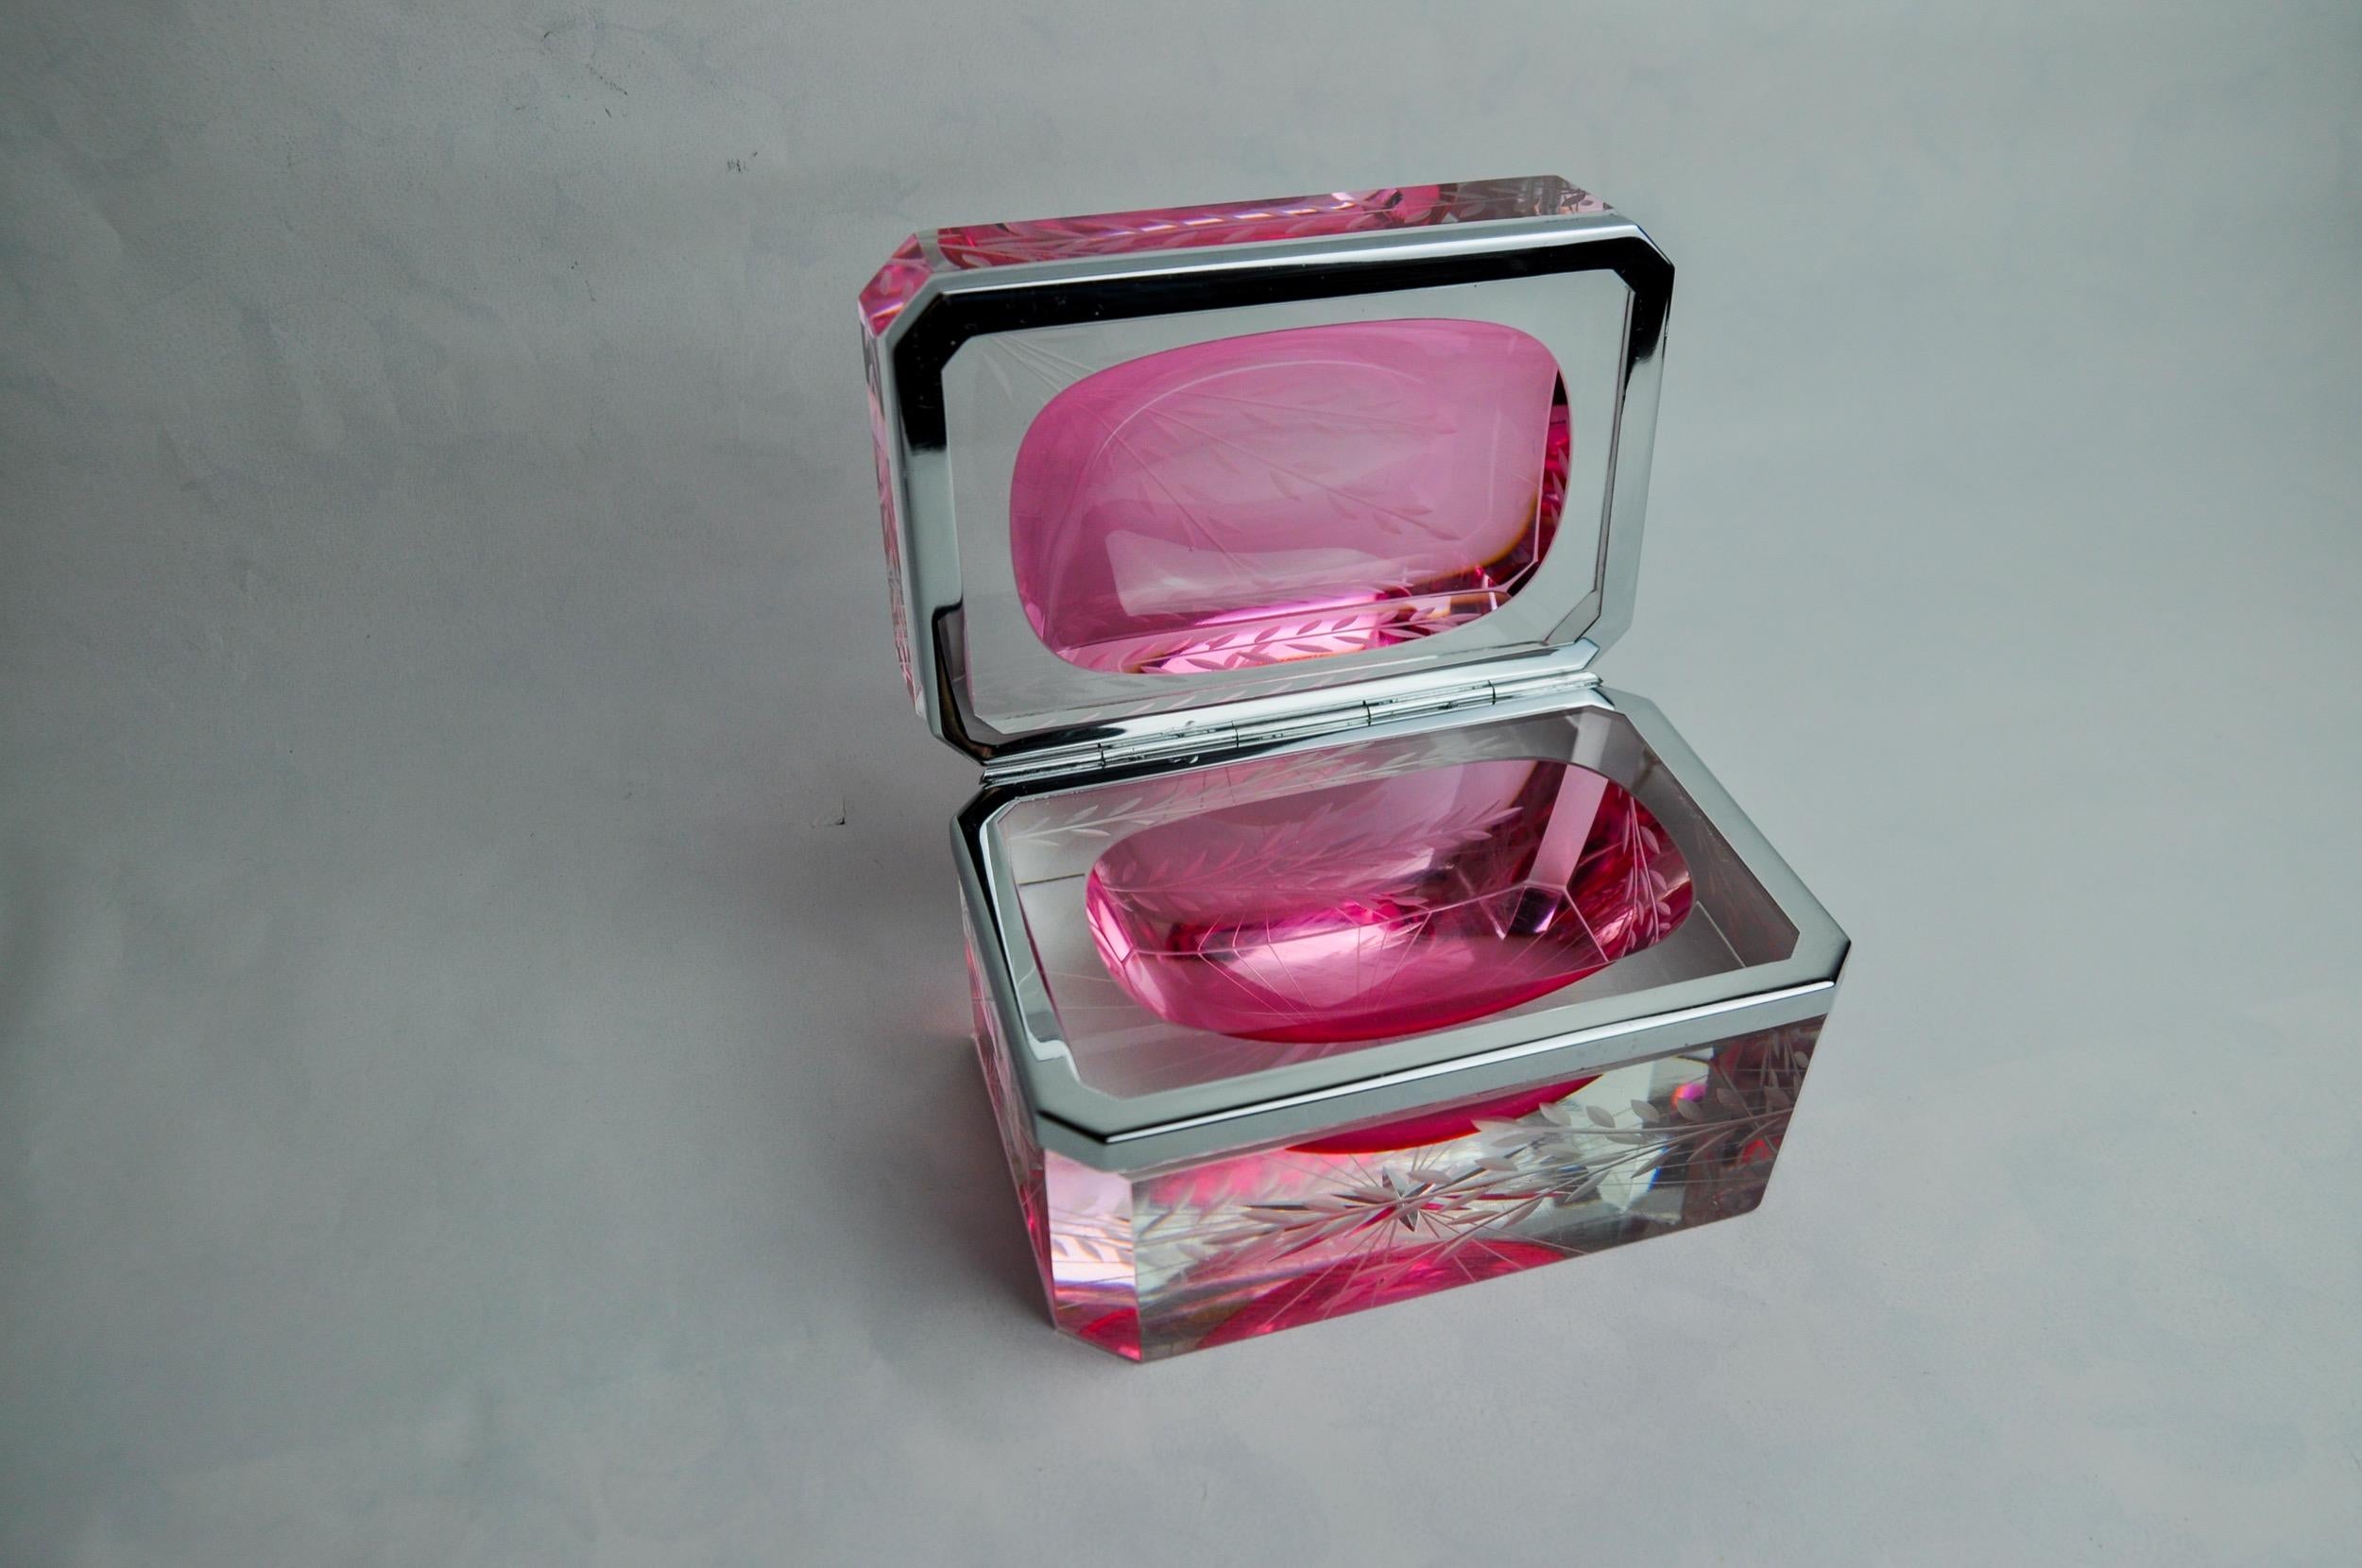 Superb and rare pink sommerso box designed and manufactured by alessandro mandruzzato in murano in the 1960s. Exceptional glass craftsmanship according to the sommerso technique (superposition of layers of molten glass) with hand-engraved floral